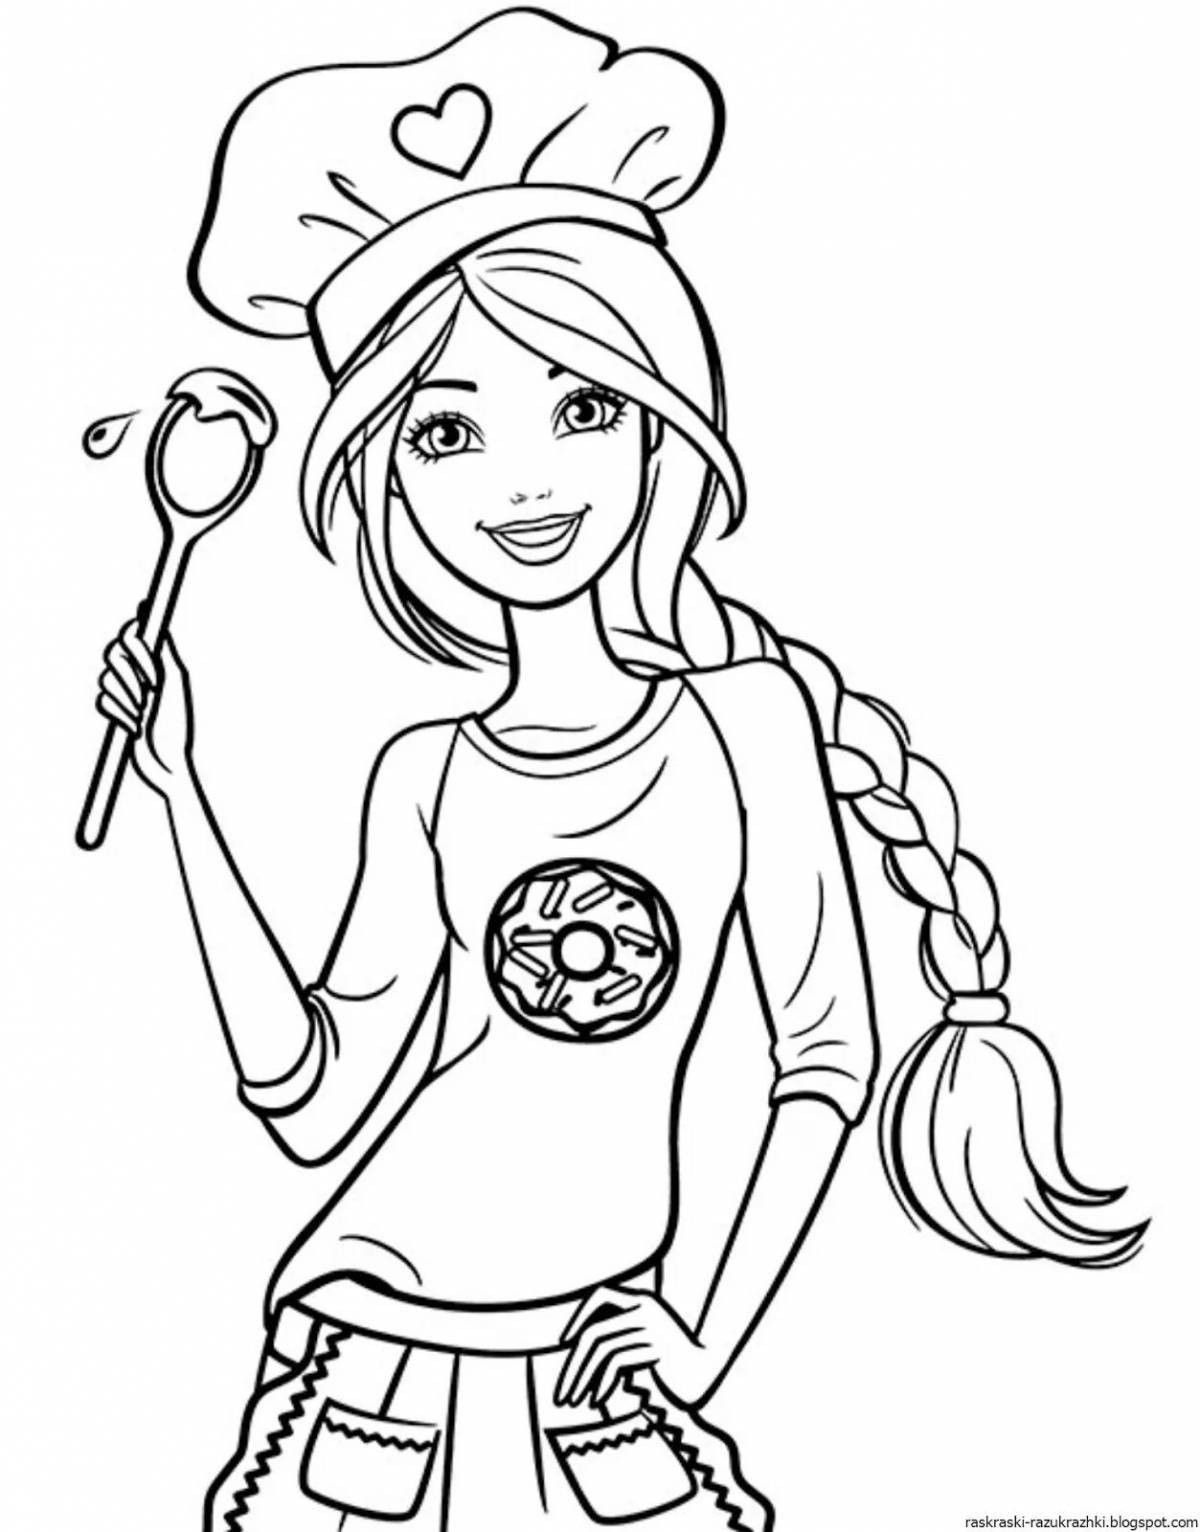 Refreshing coloring book for girls